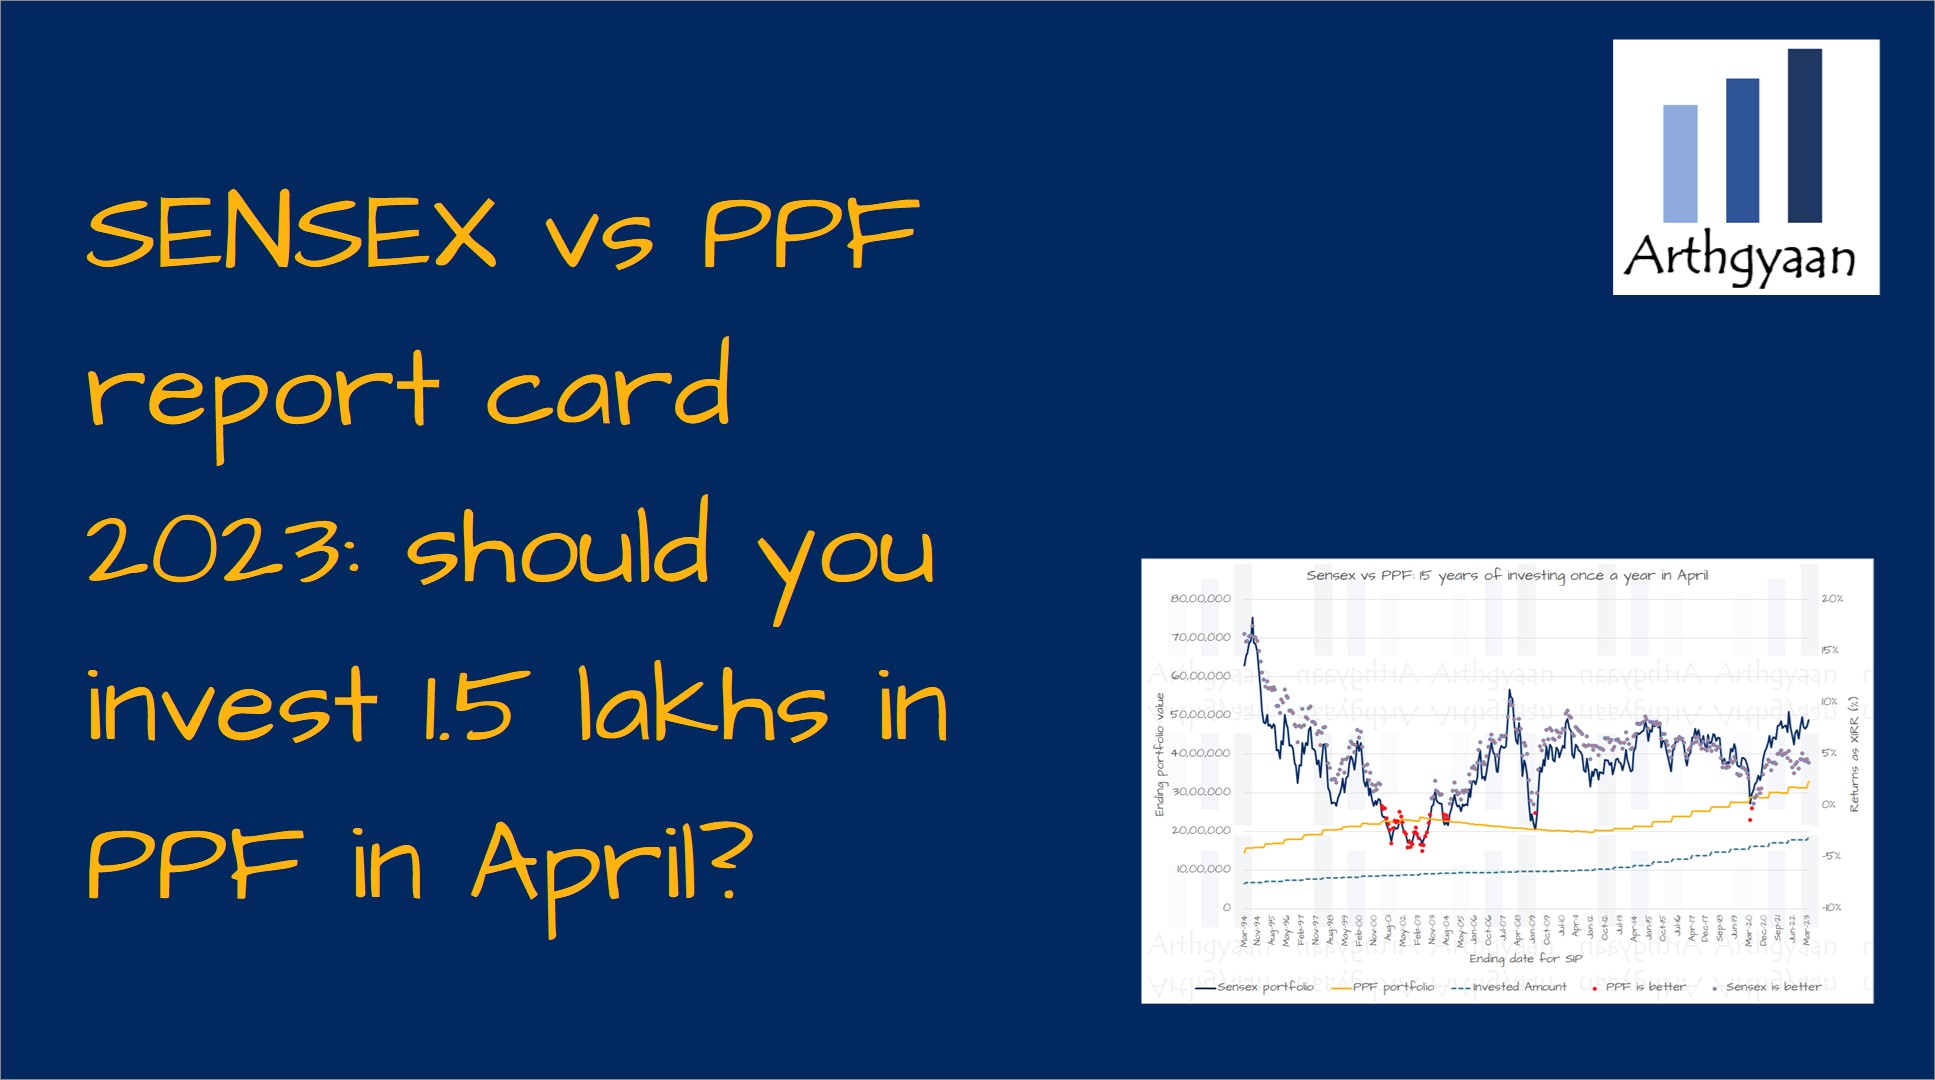 SENSEX vs PPF report card 2023: should you invest 1.5 lakhs in PPF in April?